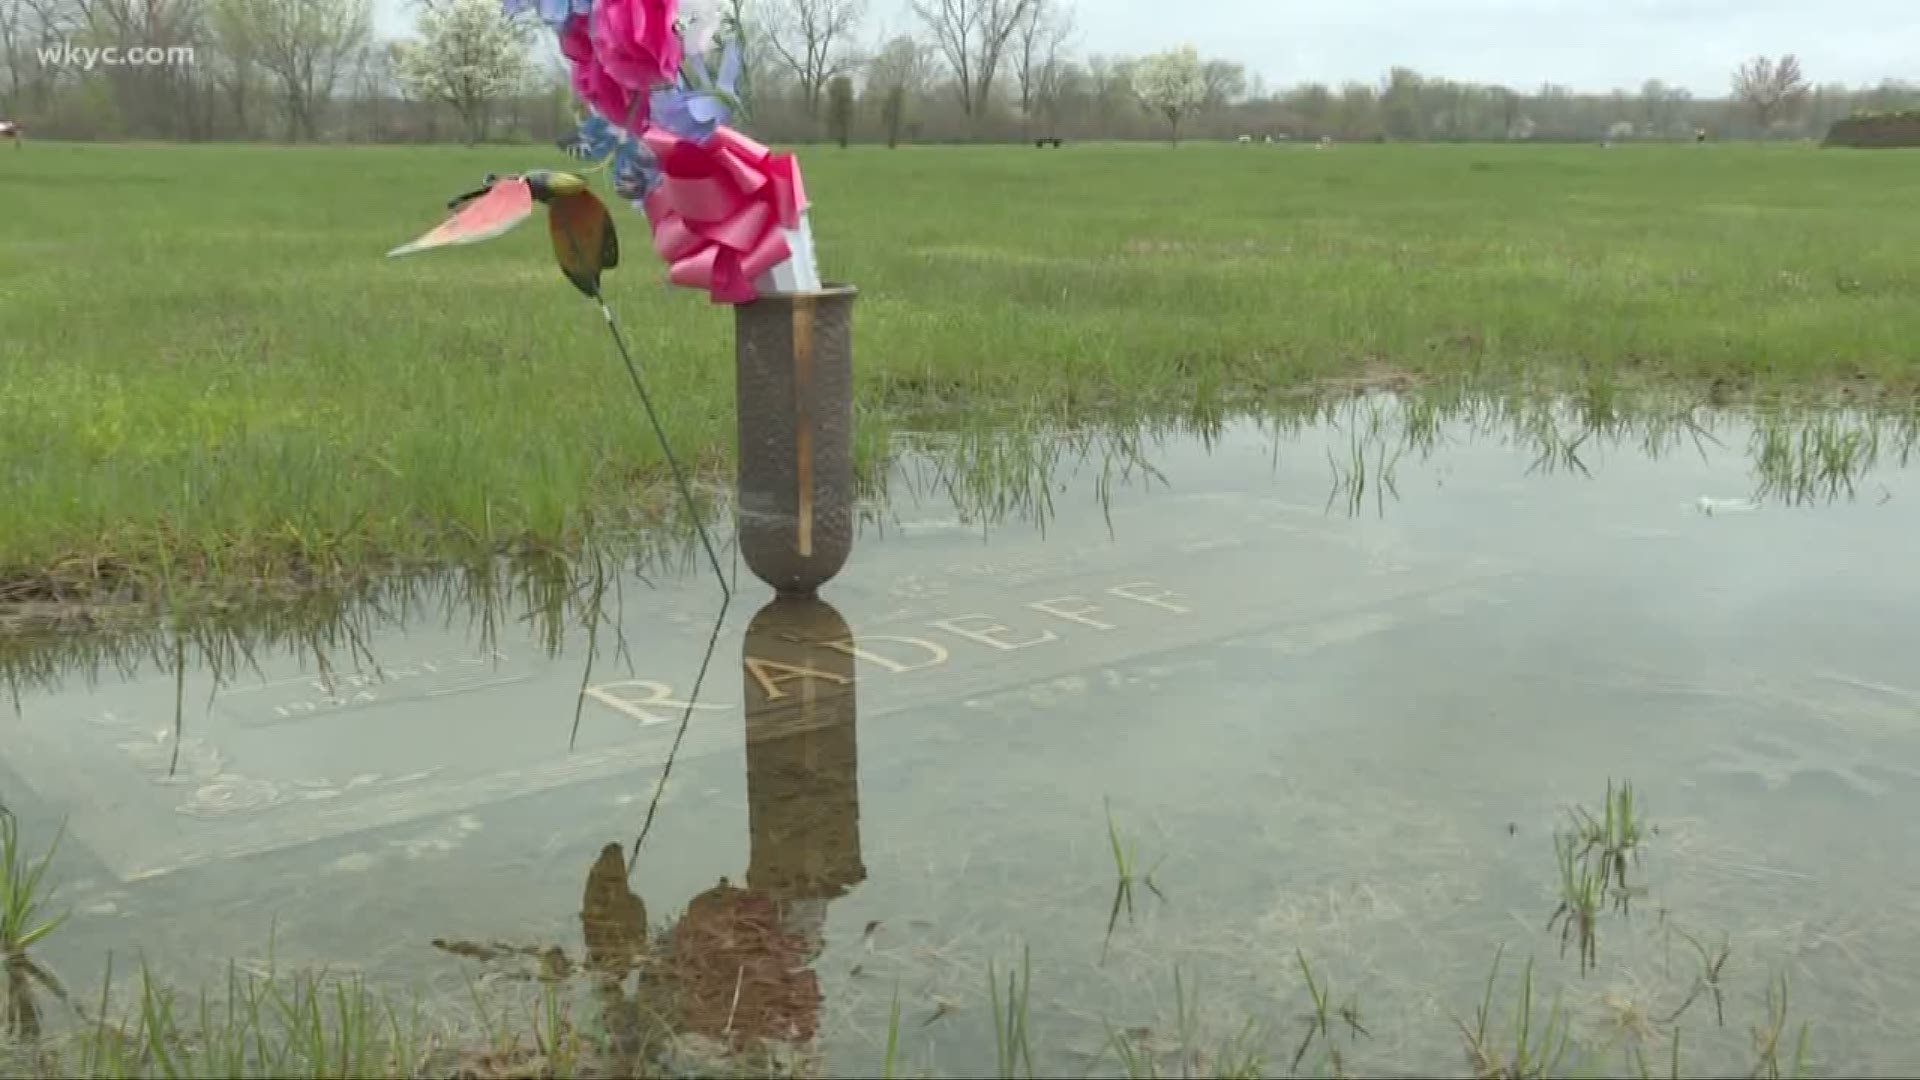 Avon Cemetery facing flooding troubles